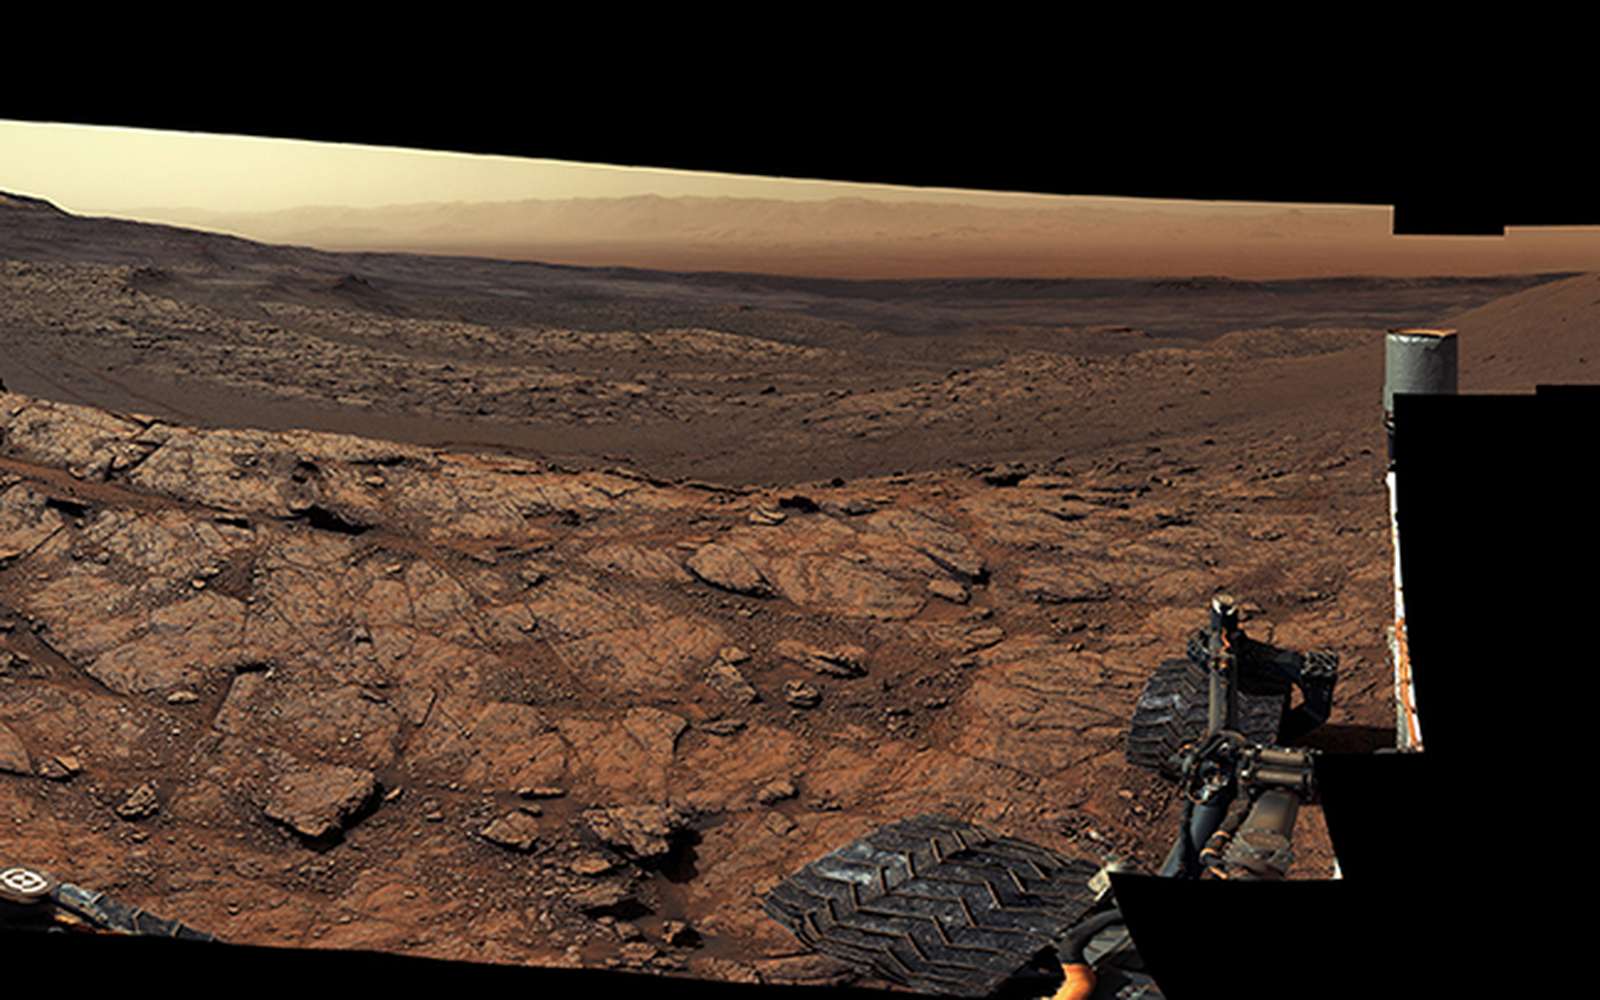 Magnificent panorama of Mars for Day 3000 from Curiosity on the Red Planet

